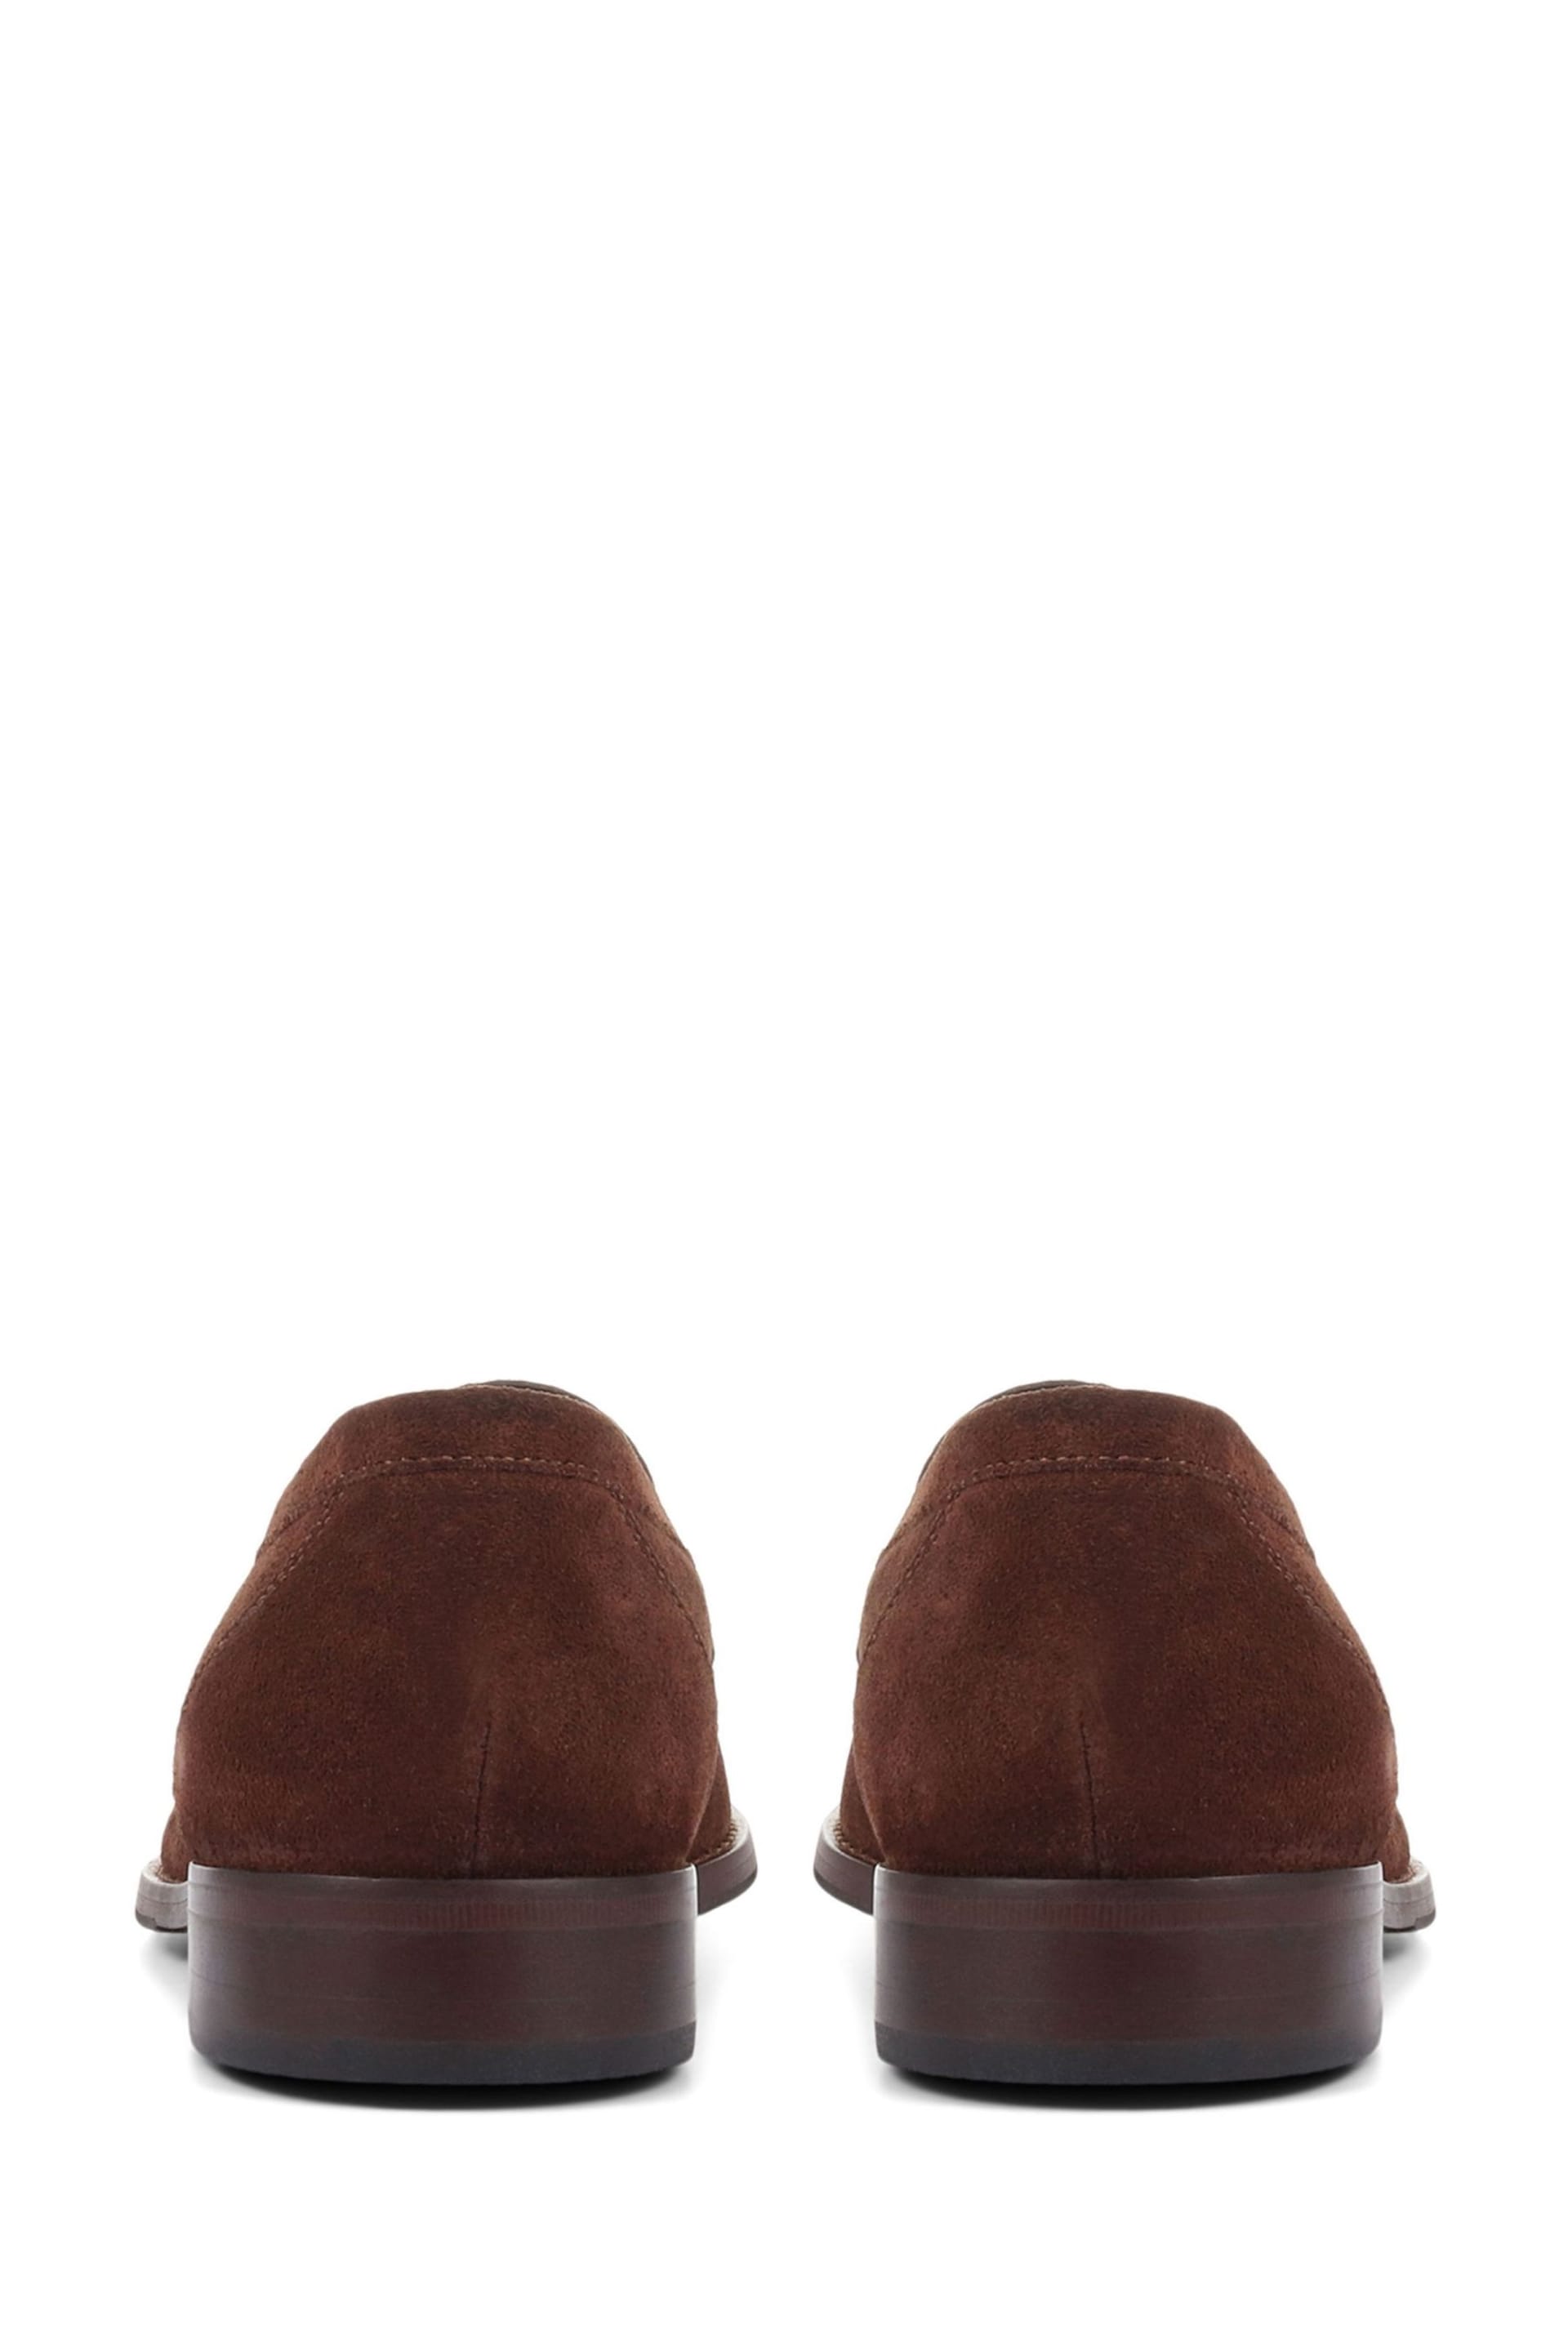 Jones Bootmaker Leather Penny Loafers - Image 5 of 7